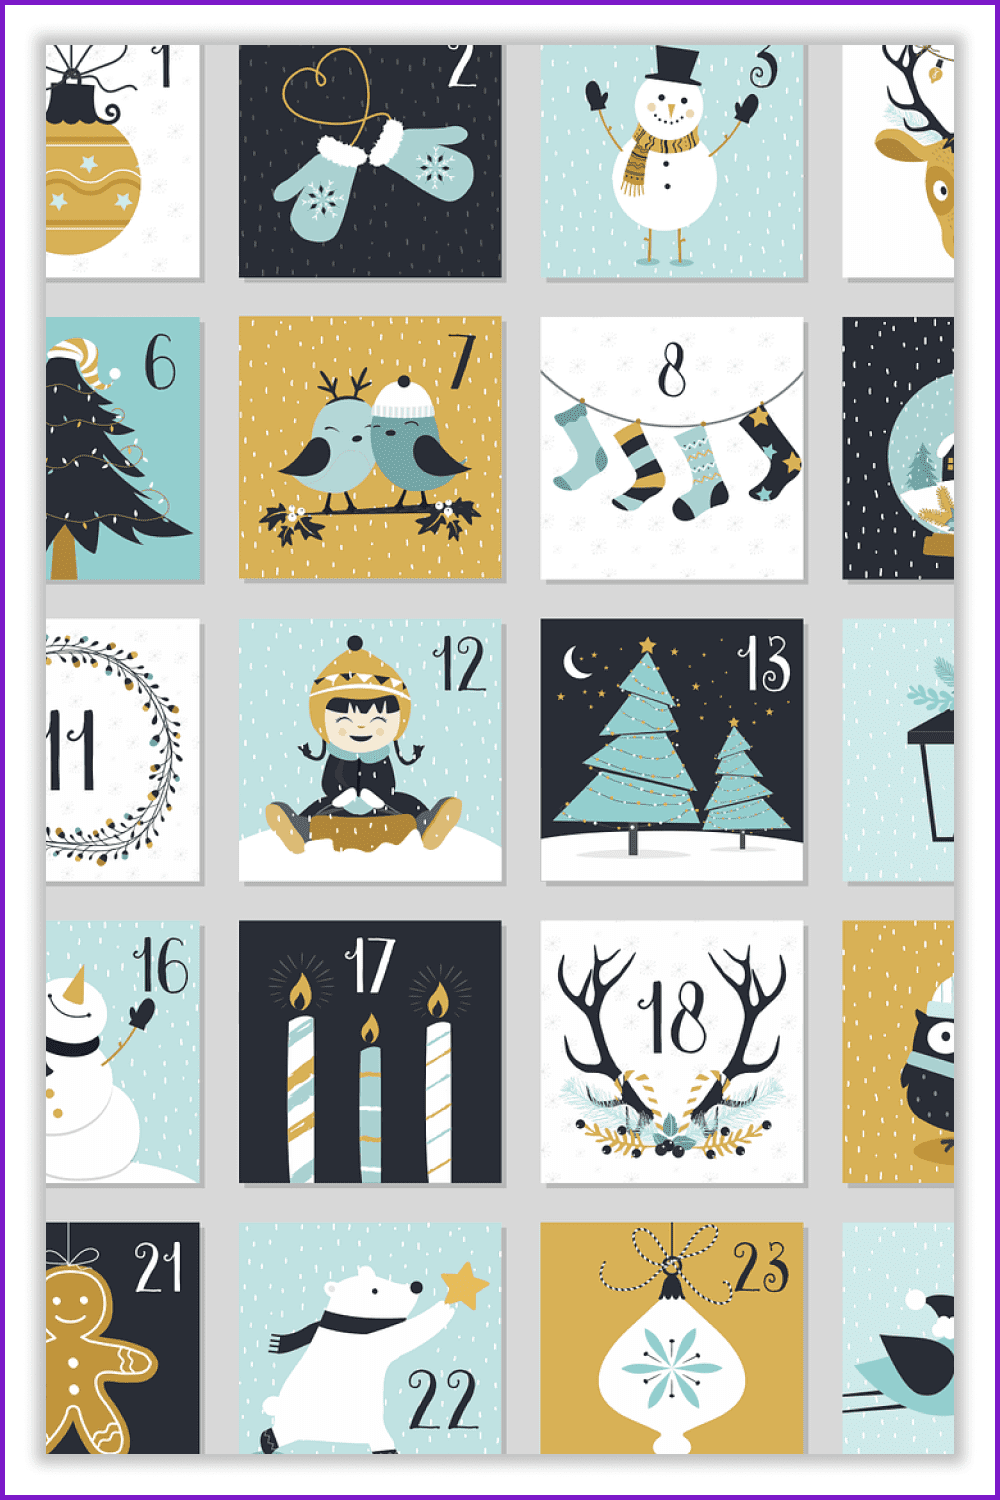 A collage of Christmas-themed Instagram posts in blue, gold and black.